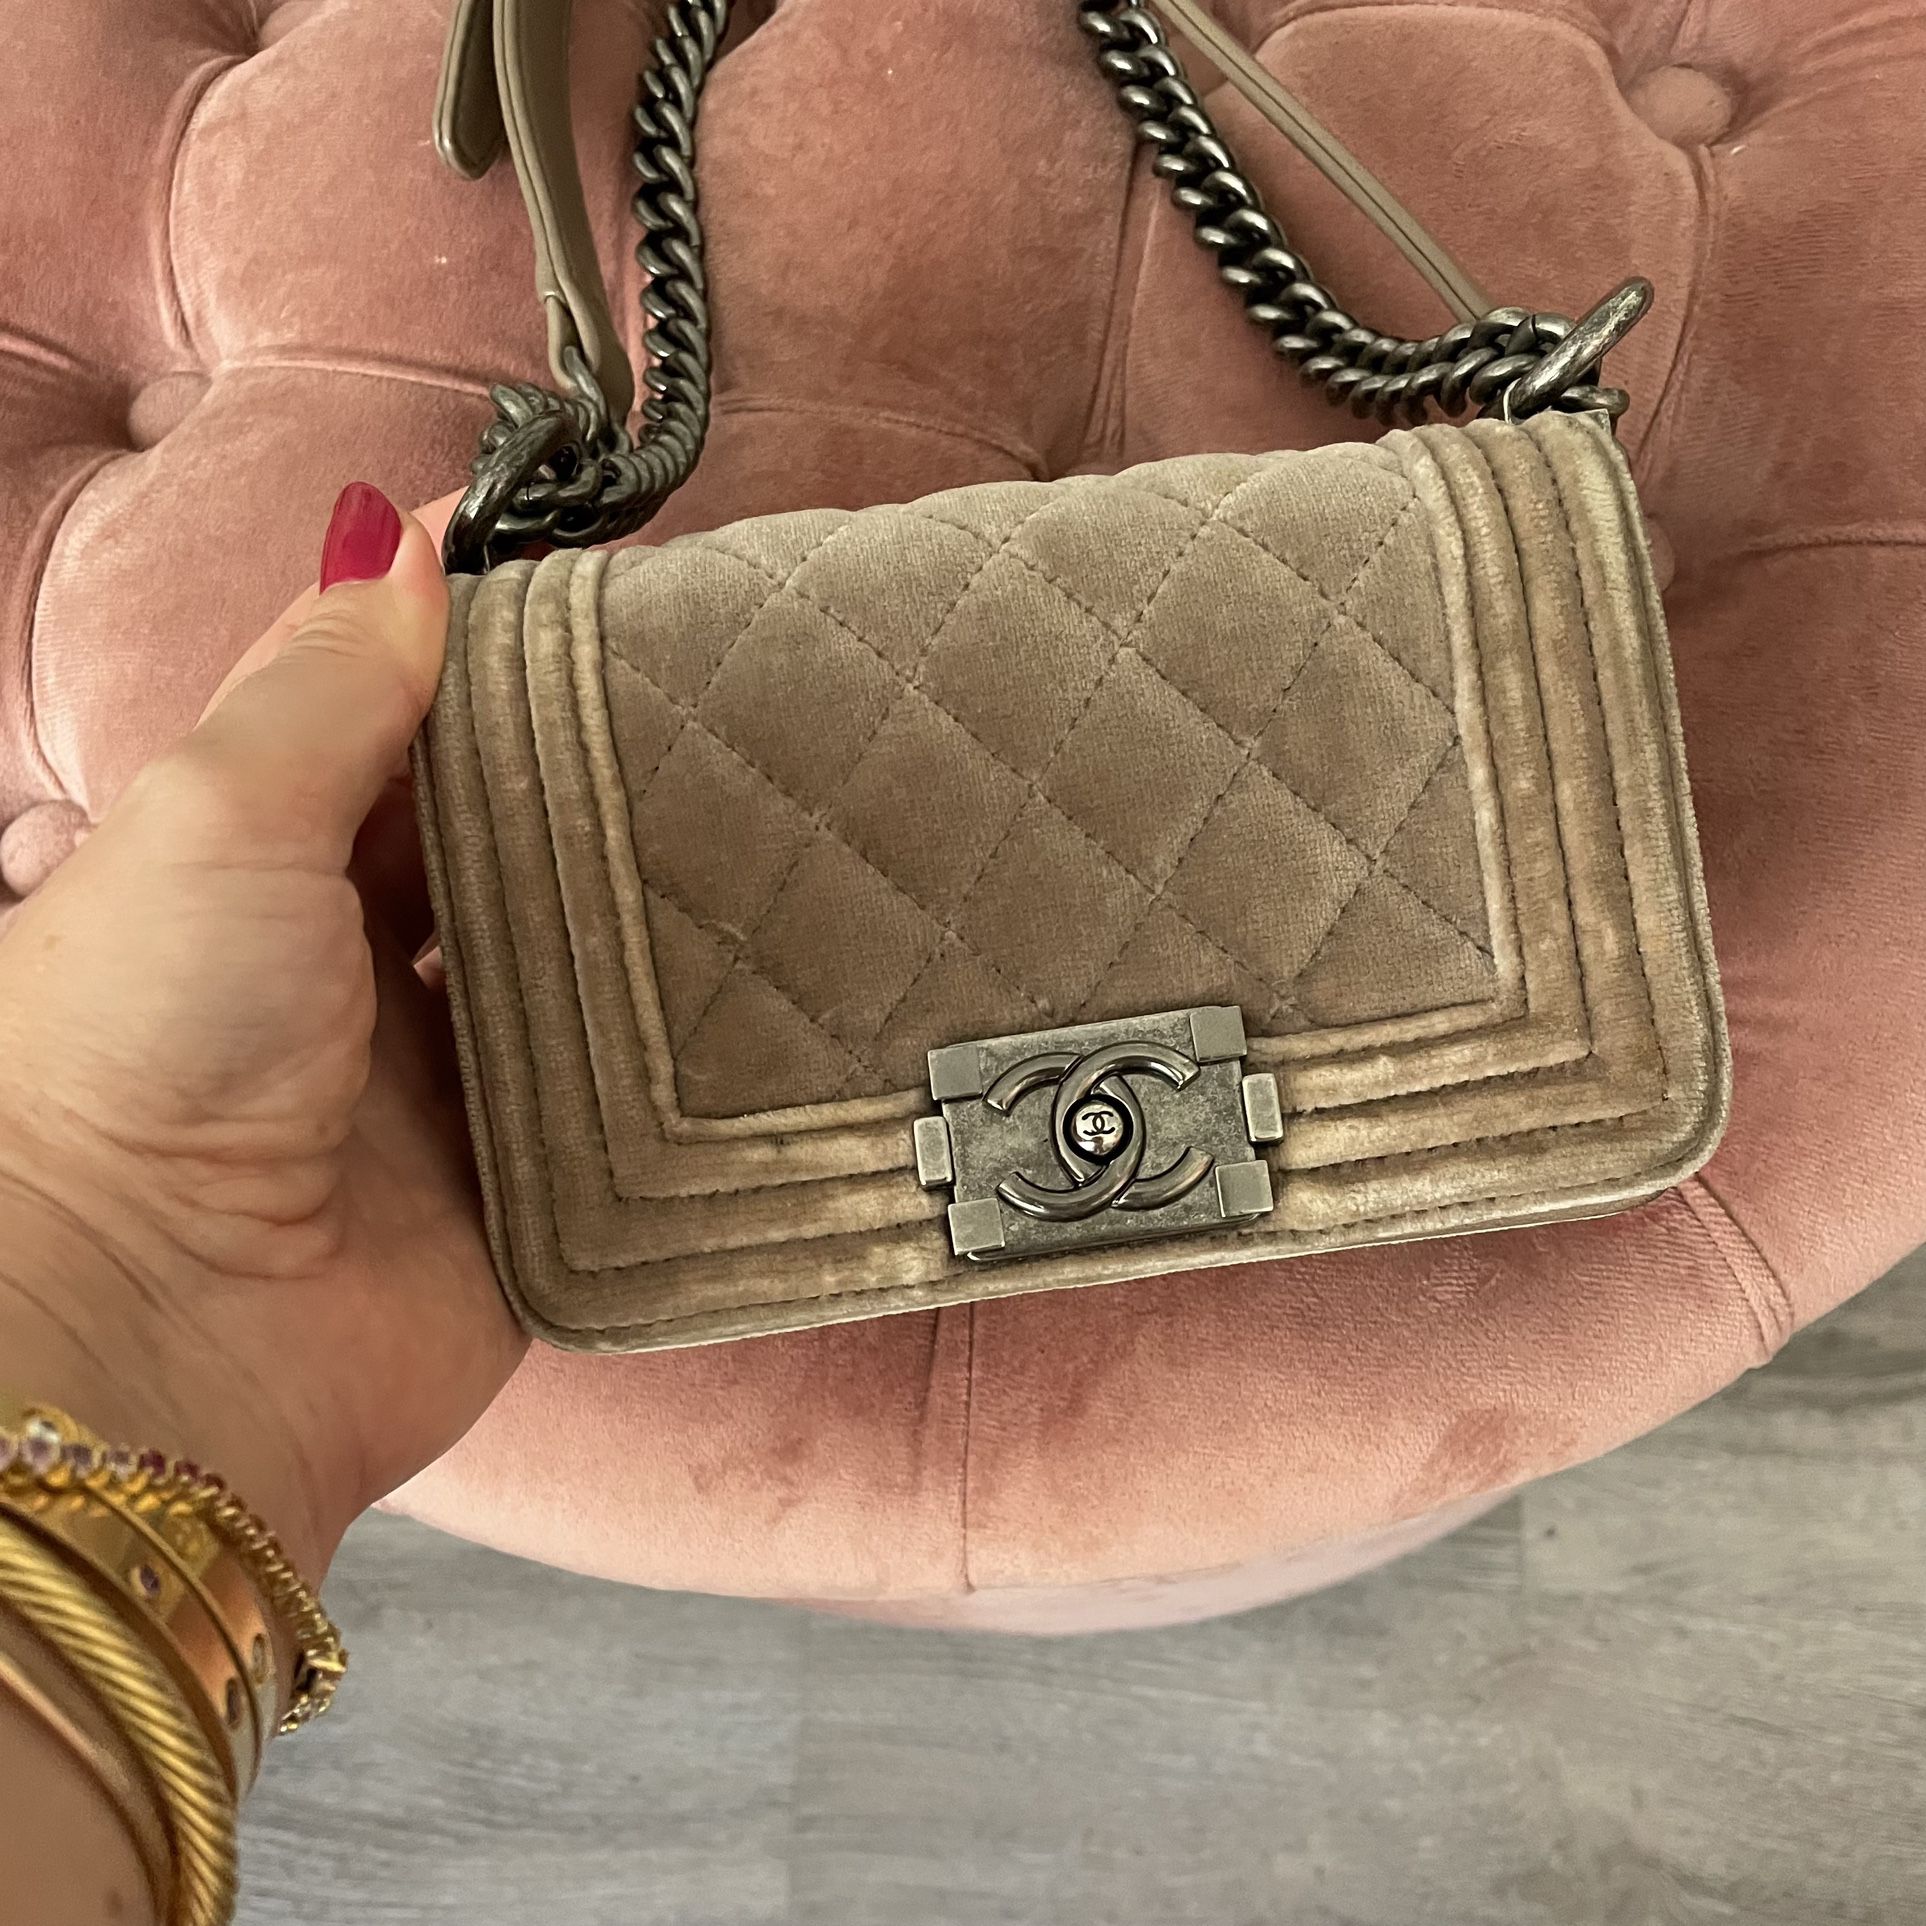 AUTHENTIC Chanel Boy Bag! Excellent Pre-Owned Condition! Gorgeous Tan /  Beige / Taupe Velvet Hardware Comes with Dust Bag, Poshmark authentication  for